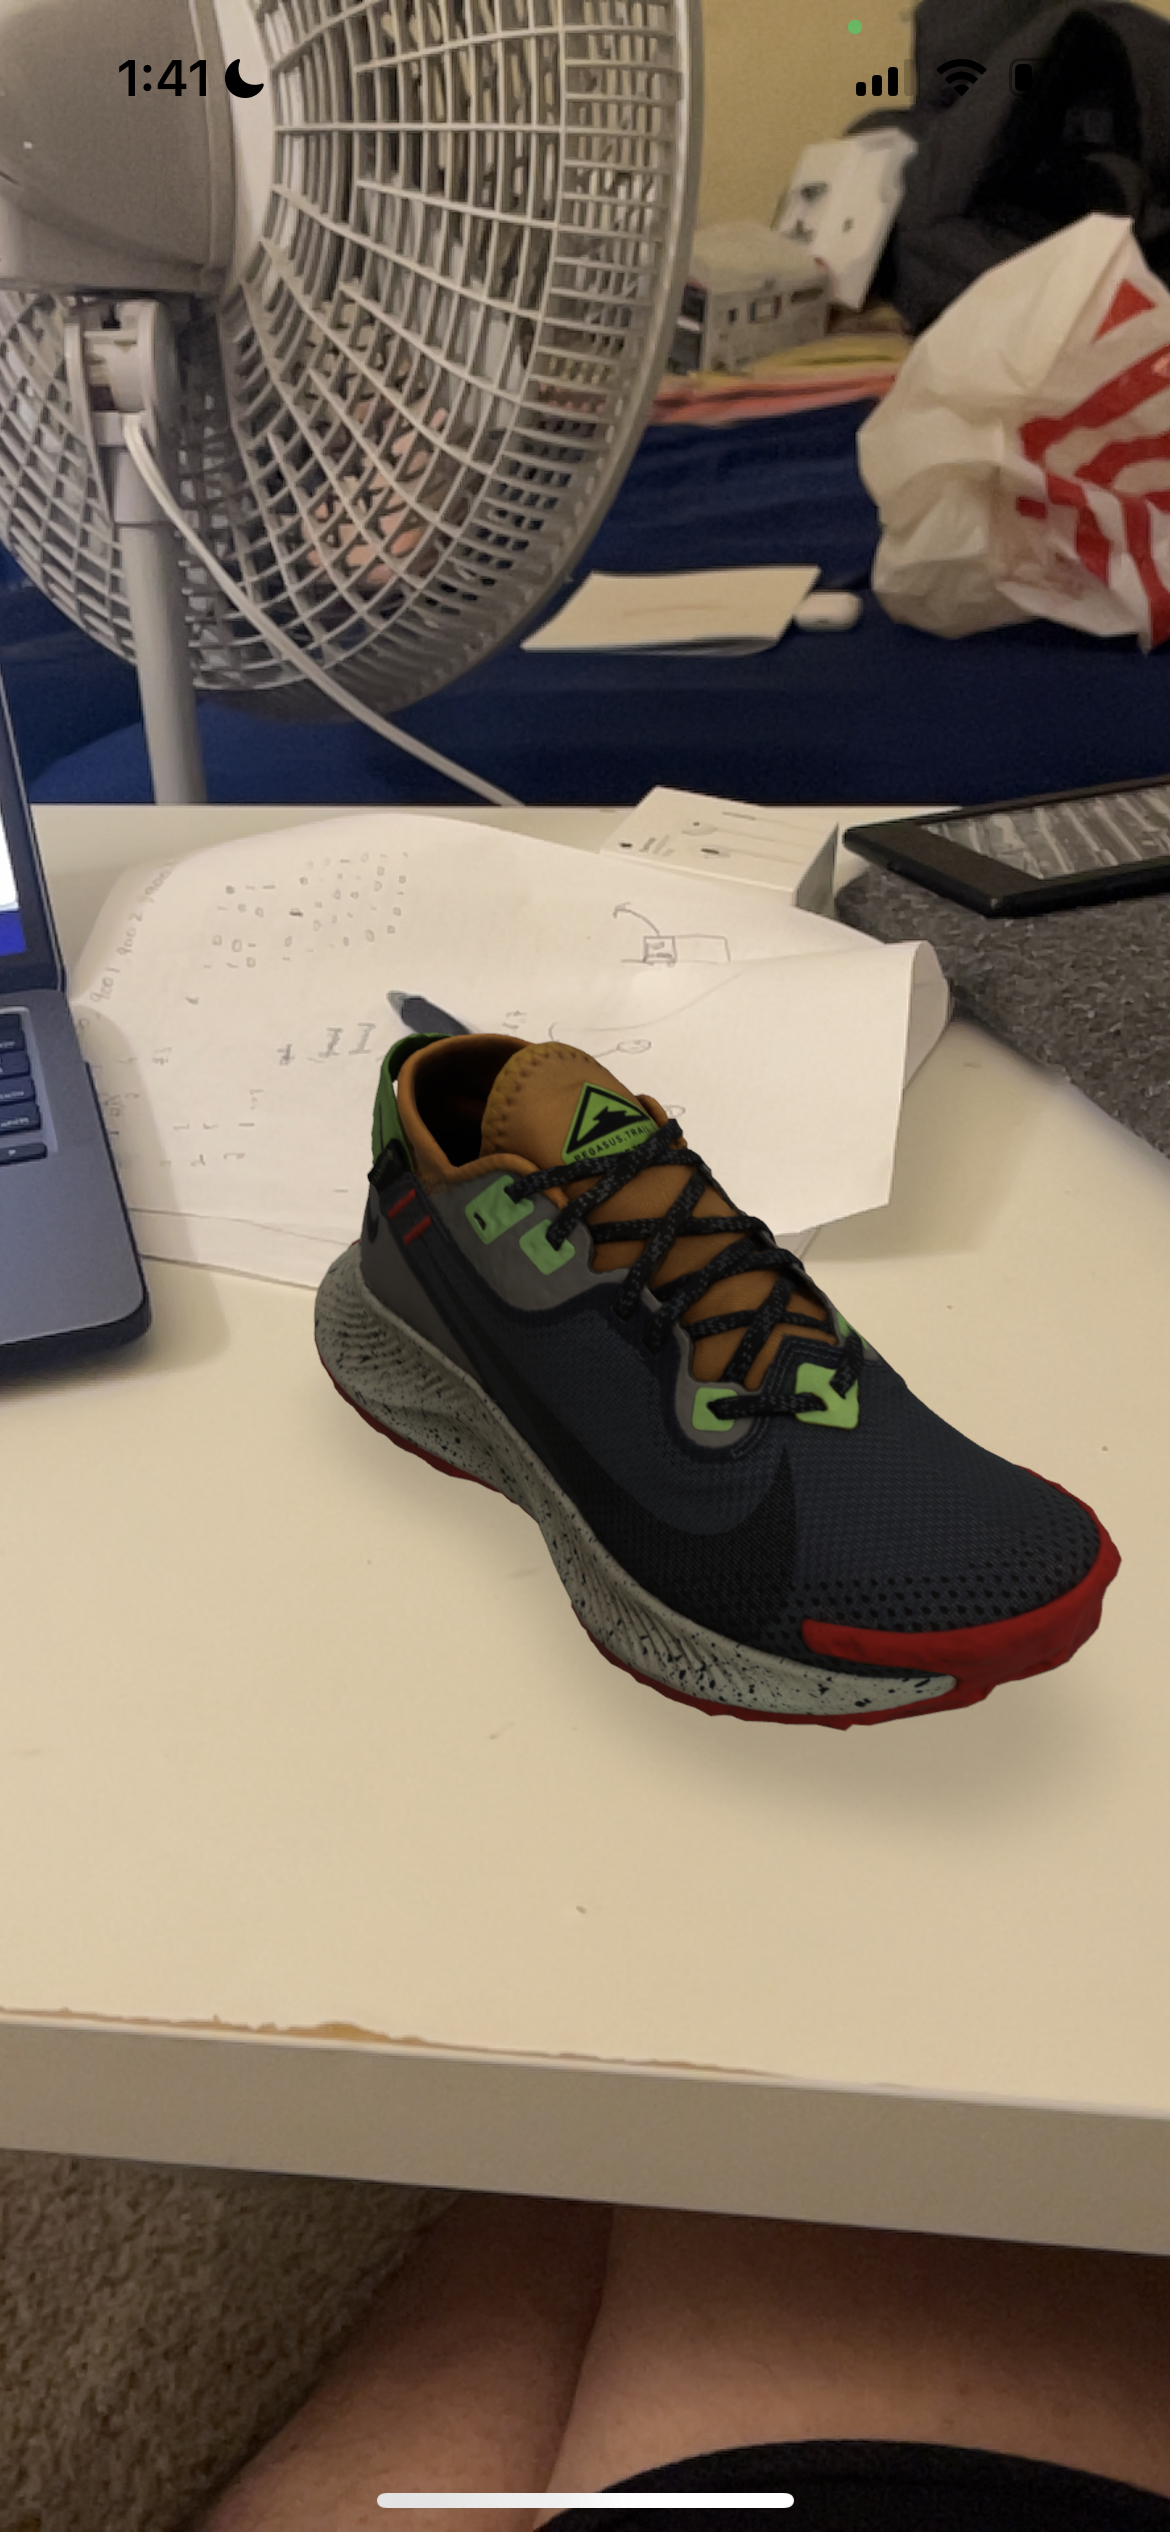 3D shoe model placed on the horizontal plane